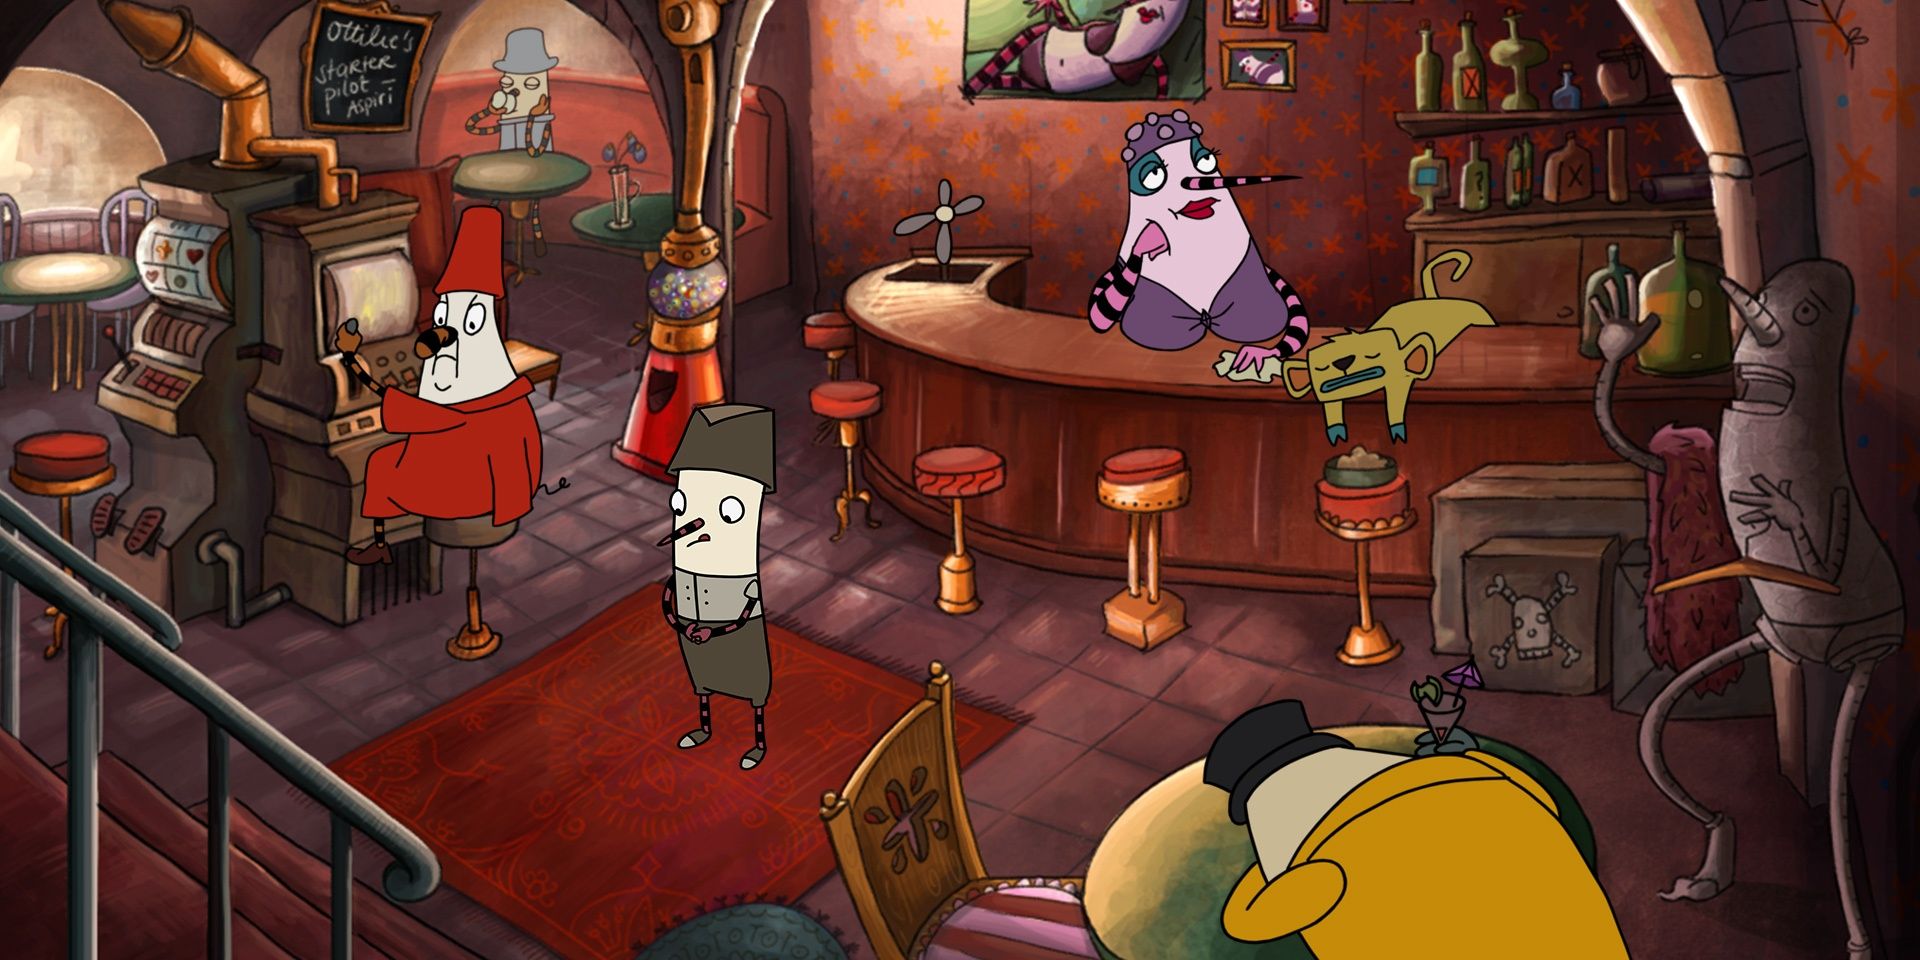 The main character Robert standing in the middle of a bar while other characters go along with their day in The Inner World